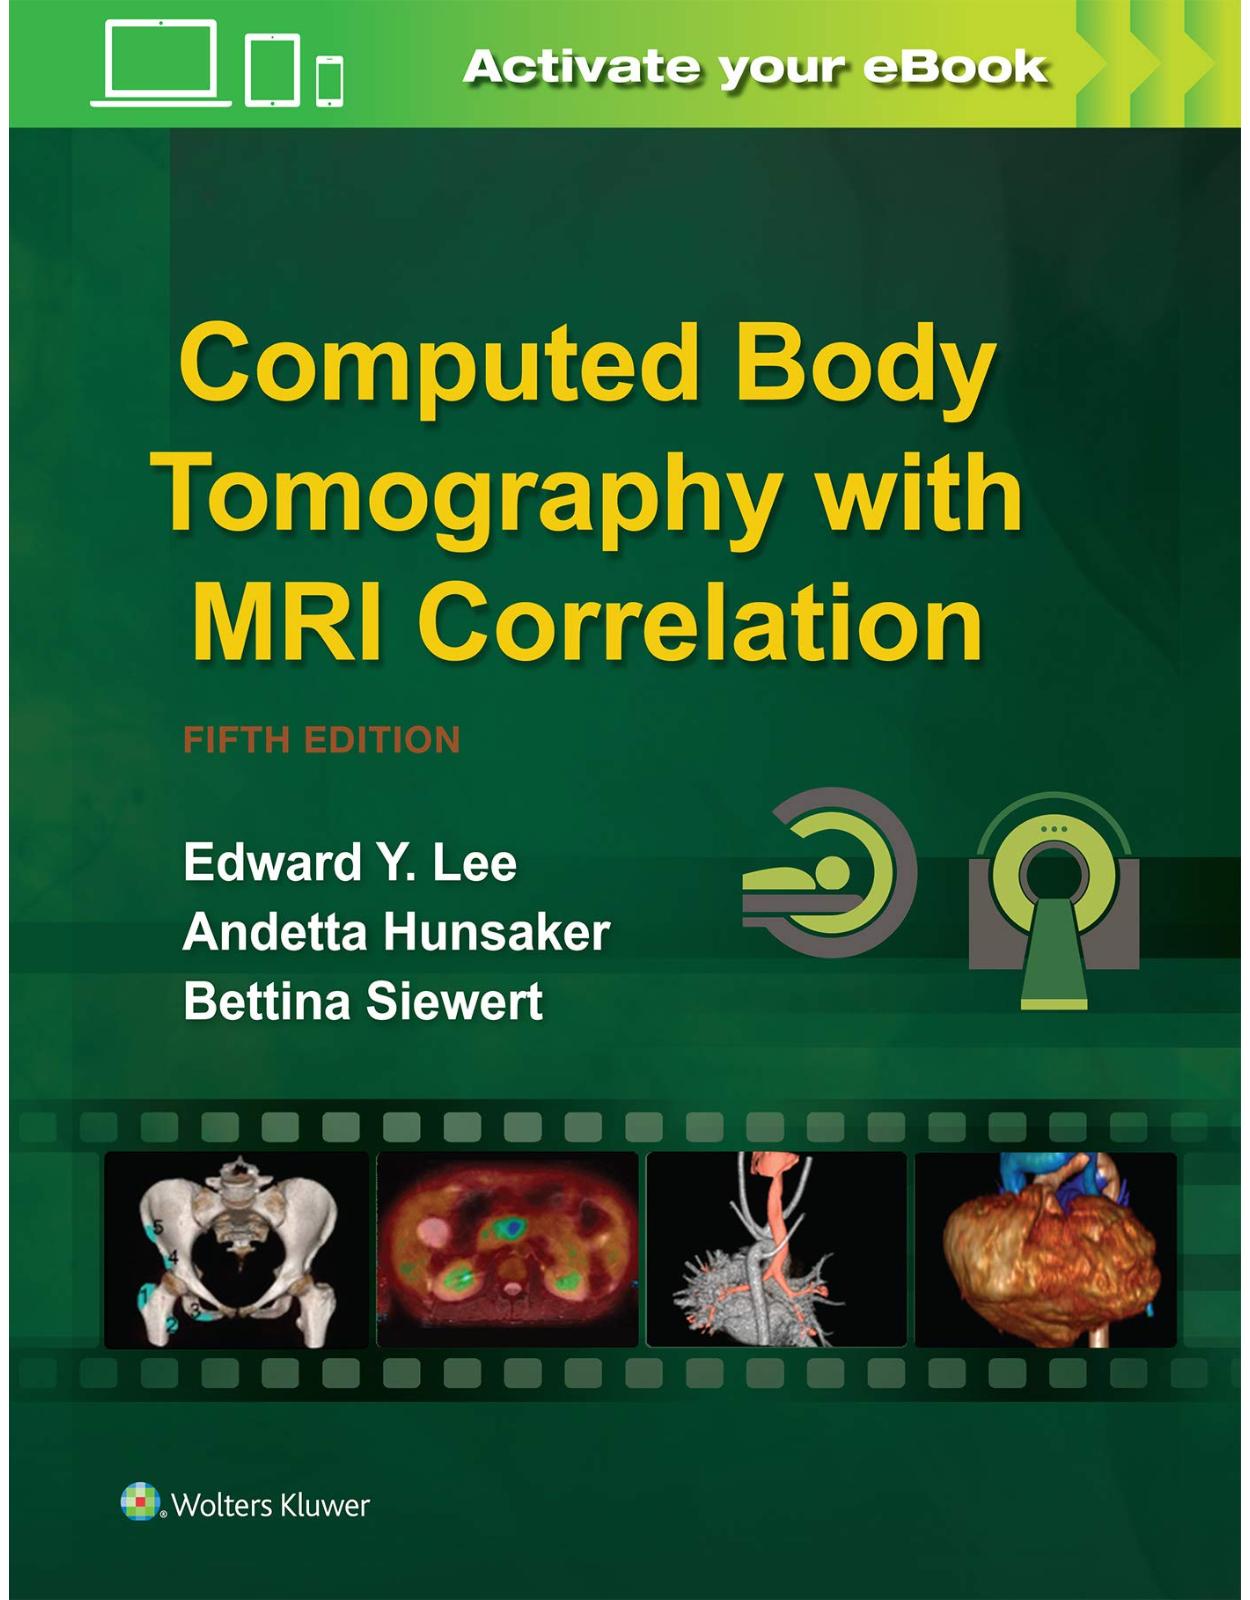 Computed Body Tomography with MRI Correlation. Fifth edition